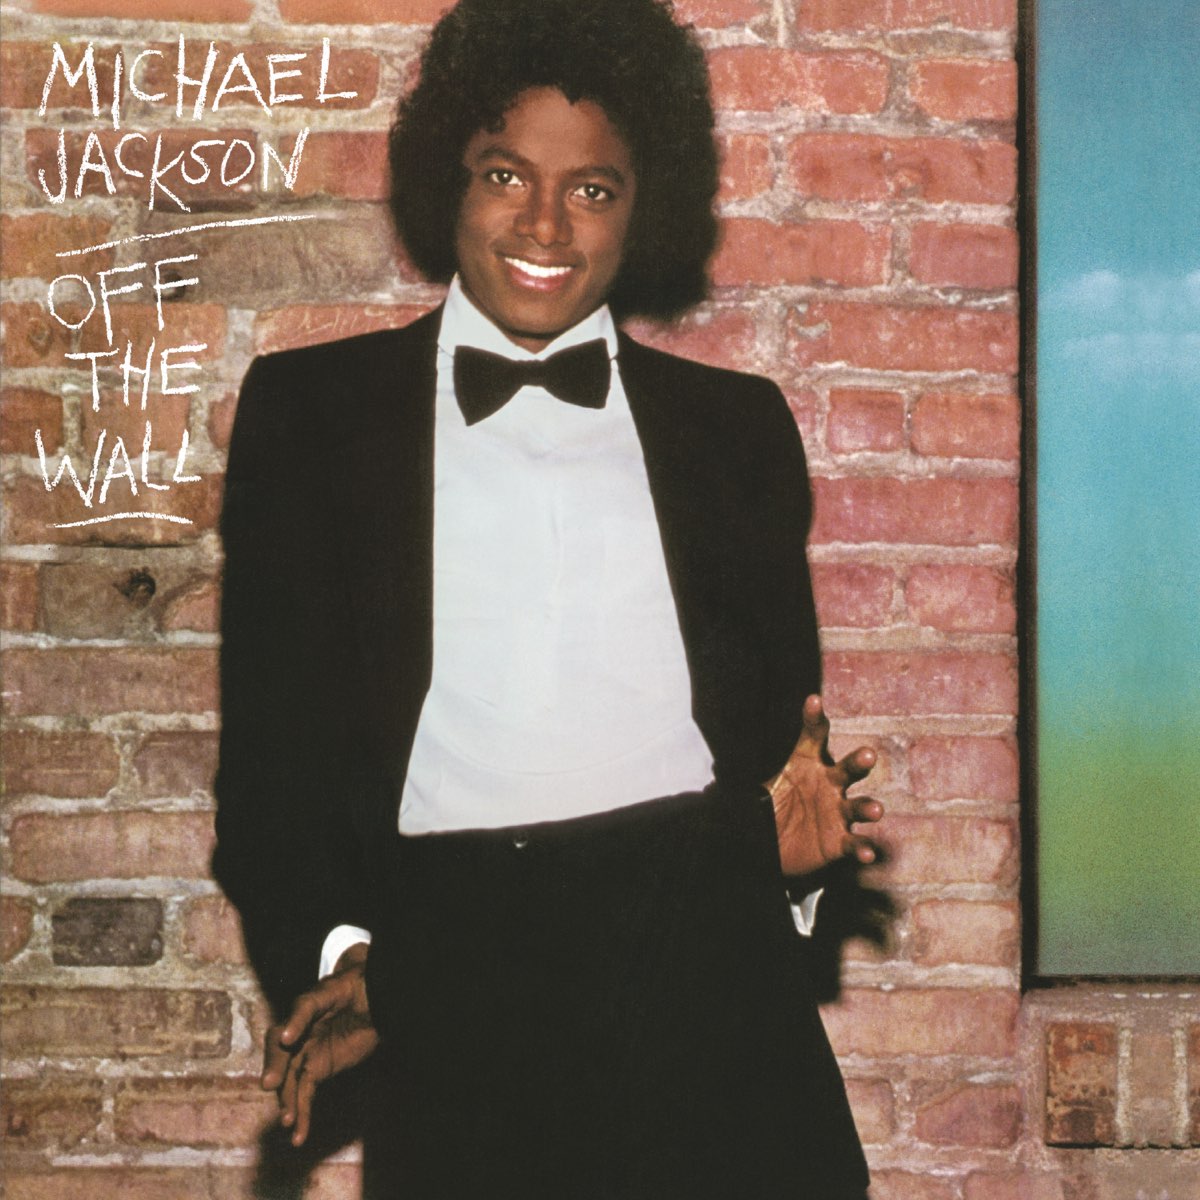 Michael Jackson's 'Off the Wall' has now surpassed 100 million streams on Spotify (song).